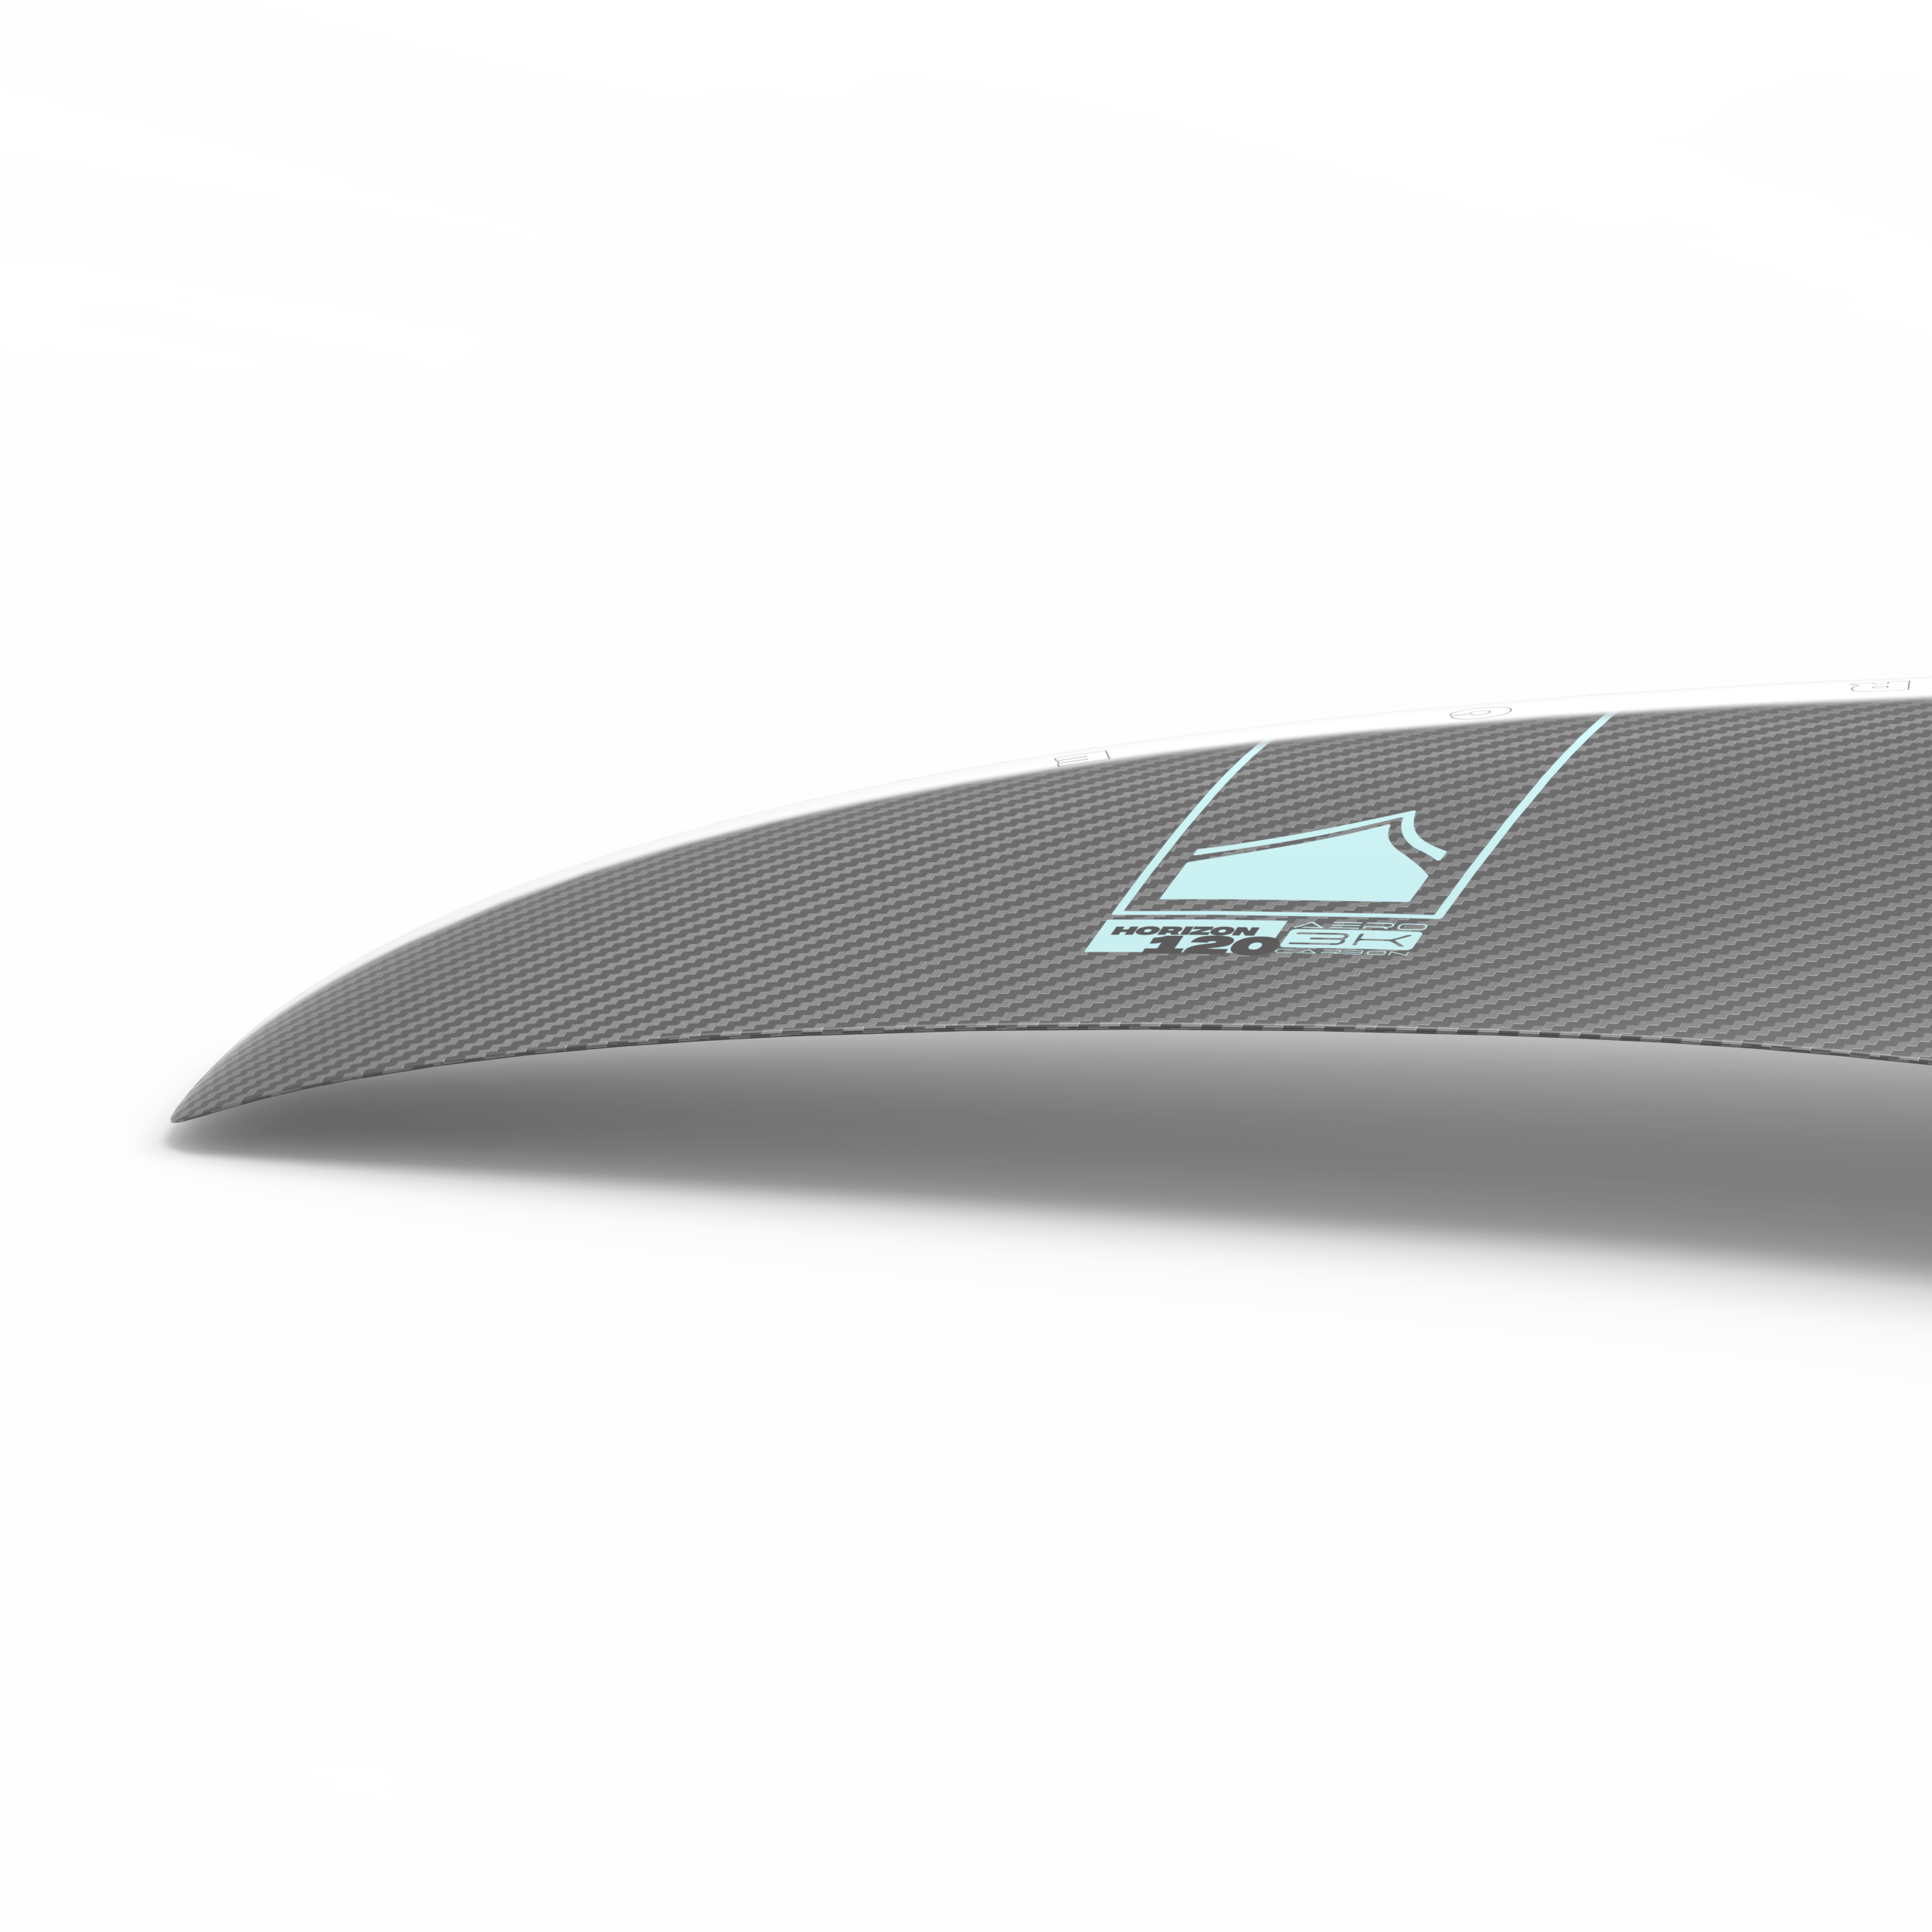 A Liquid Force 2024 Horizon Surf 120 Front Wing with a blue Liquid Force logo on it, designed for the Horizon 120 speed wing.